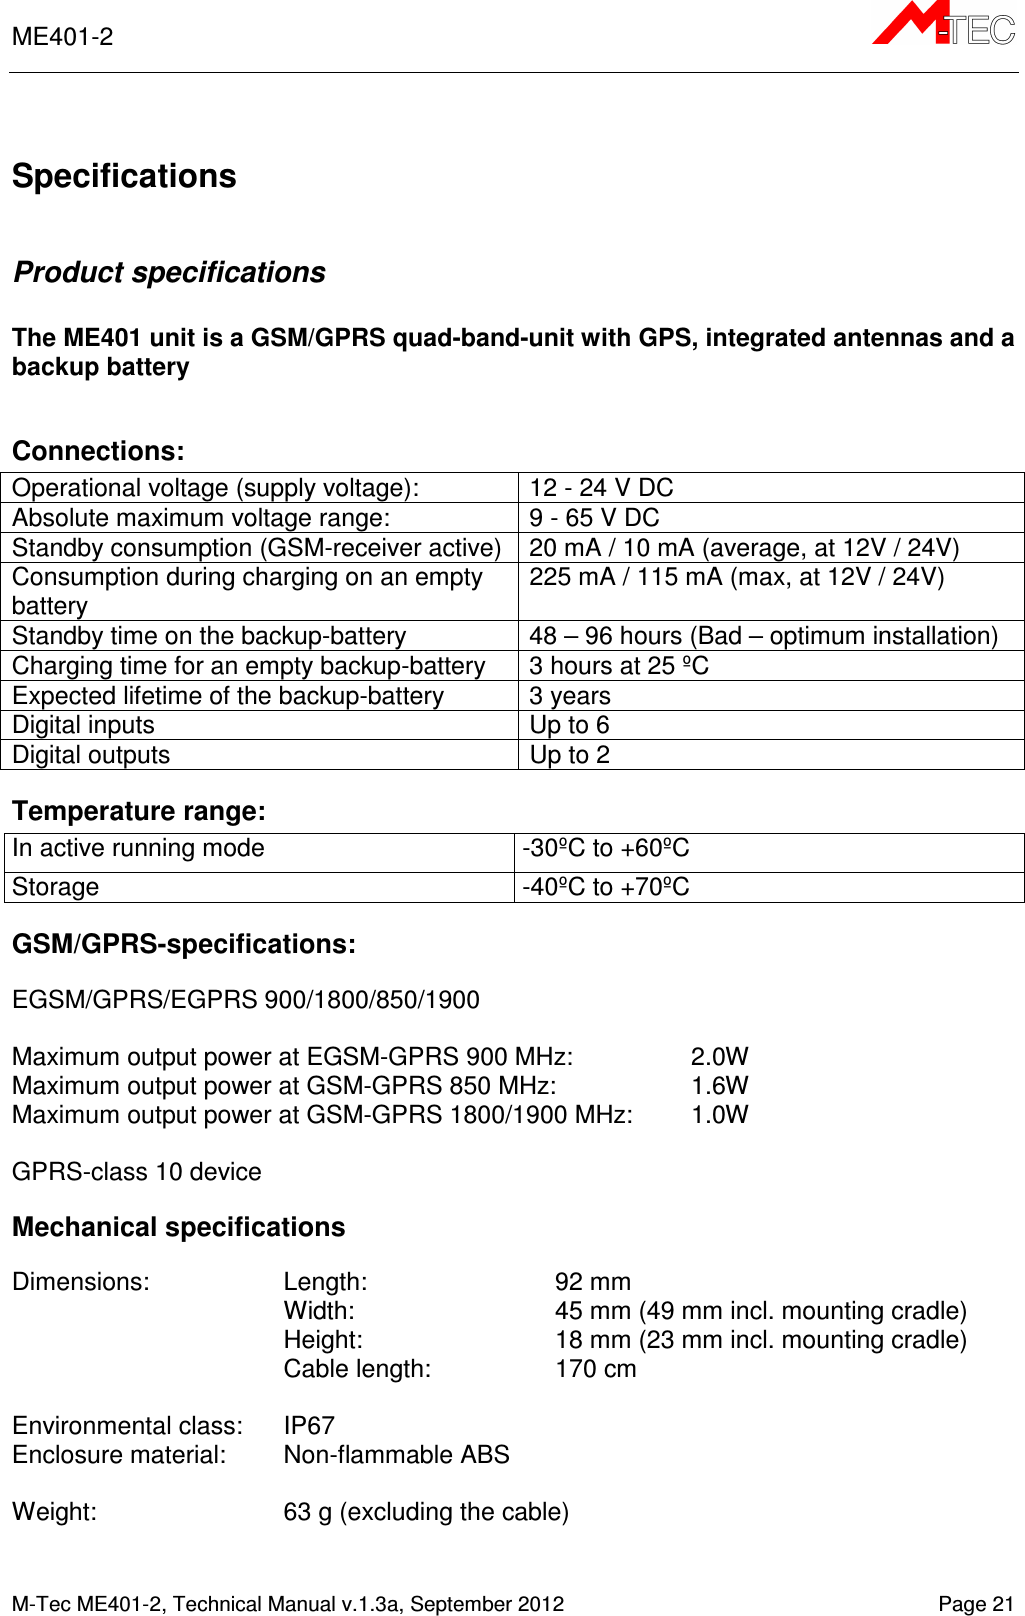 ME401-2      M-Tec ME401-2, Technical Manual v.1.3a, September 2012   Page 21  Specifications  Product specifications  The ME401 unit is a GSM/GPRS quad-band-unit with GPS, integrated antennas and a backup battery  Connections: Operational voltage (supply voltage):  12 - 24 V DC Absolute maximum voltage range:  9 - 65 V DC Standby consumption (GSM-receiver active)  20 mA / 10 mA (average, at 12V / 24V) Consumption during charging on an empty battery 225 mA / 115 mA (max, at 12V / 24V) Standby time on the backup-battery  48 – 96 hours (Bad – optimum installation) Charging time for an empty backup-battery  3 hours at 25 ºC Expected lifetime of the backup-battery  3 years Digital inputs  Up to 6 Digital outputs  Up to 2 Temperature range: In active running mode  -30ºC to +60ºC Storage  -40ºC to +70ºC GSM/GPRS-specifications:  EGSM/GPRS/EGPRS 900/1800/850/1900  Maximum output power at EGSM-GPRS 900 MHz:  2.0W Maximum output power at GSM-GPRS 850 MHz:  1.6W Maximum output power at GSM-GPRS 1800/1900 MHz:   1.0W  GPRS-class 10 device Mechanical specifications  Dimensions:  Length:     92 mm Width:     45 mm (49 mm incl. mounting cradle)  Height:    18 mm (23 mm incl. mounting cradle) Cable length:    170 cm  Environmental class:  IP67 Enclosure material:  Non-flammable ABS  Weight:    63 g (excluding the cable)   